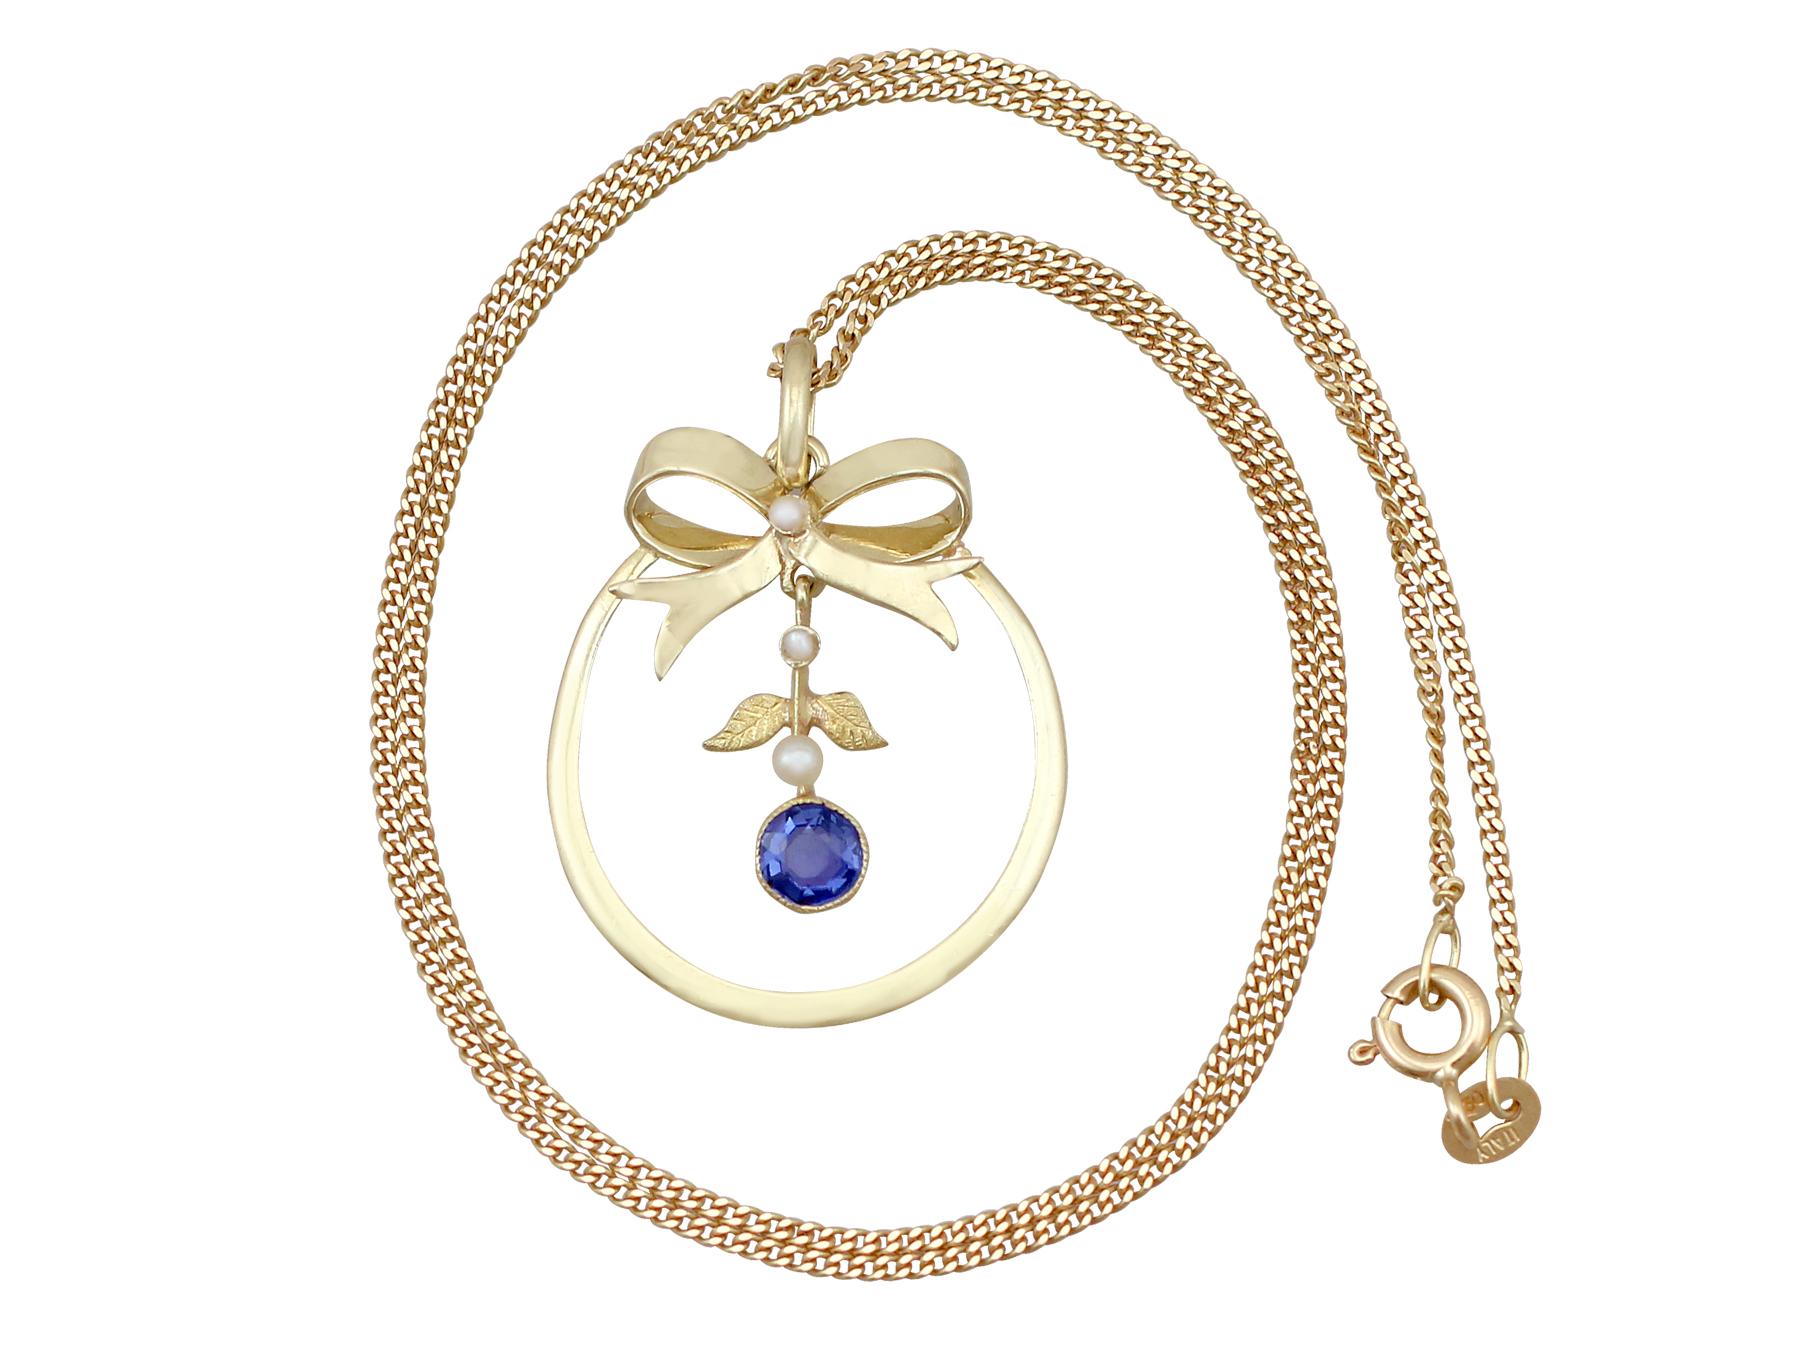 An impressive antique 0.42 carat sapphire and seed pearl, 15 carat yellow gold pendant; part of our diverse antique jewellery and estate jewelry collections.

This fine and impressive antique sapphire pendant has been crafted in 15ct yellow